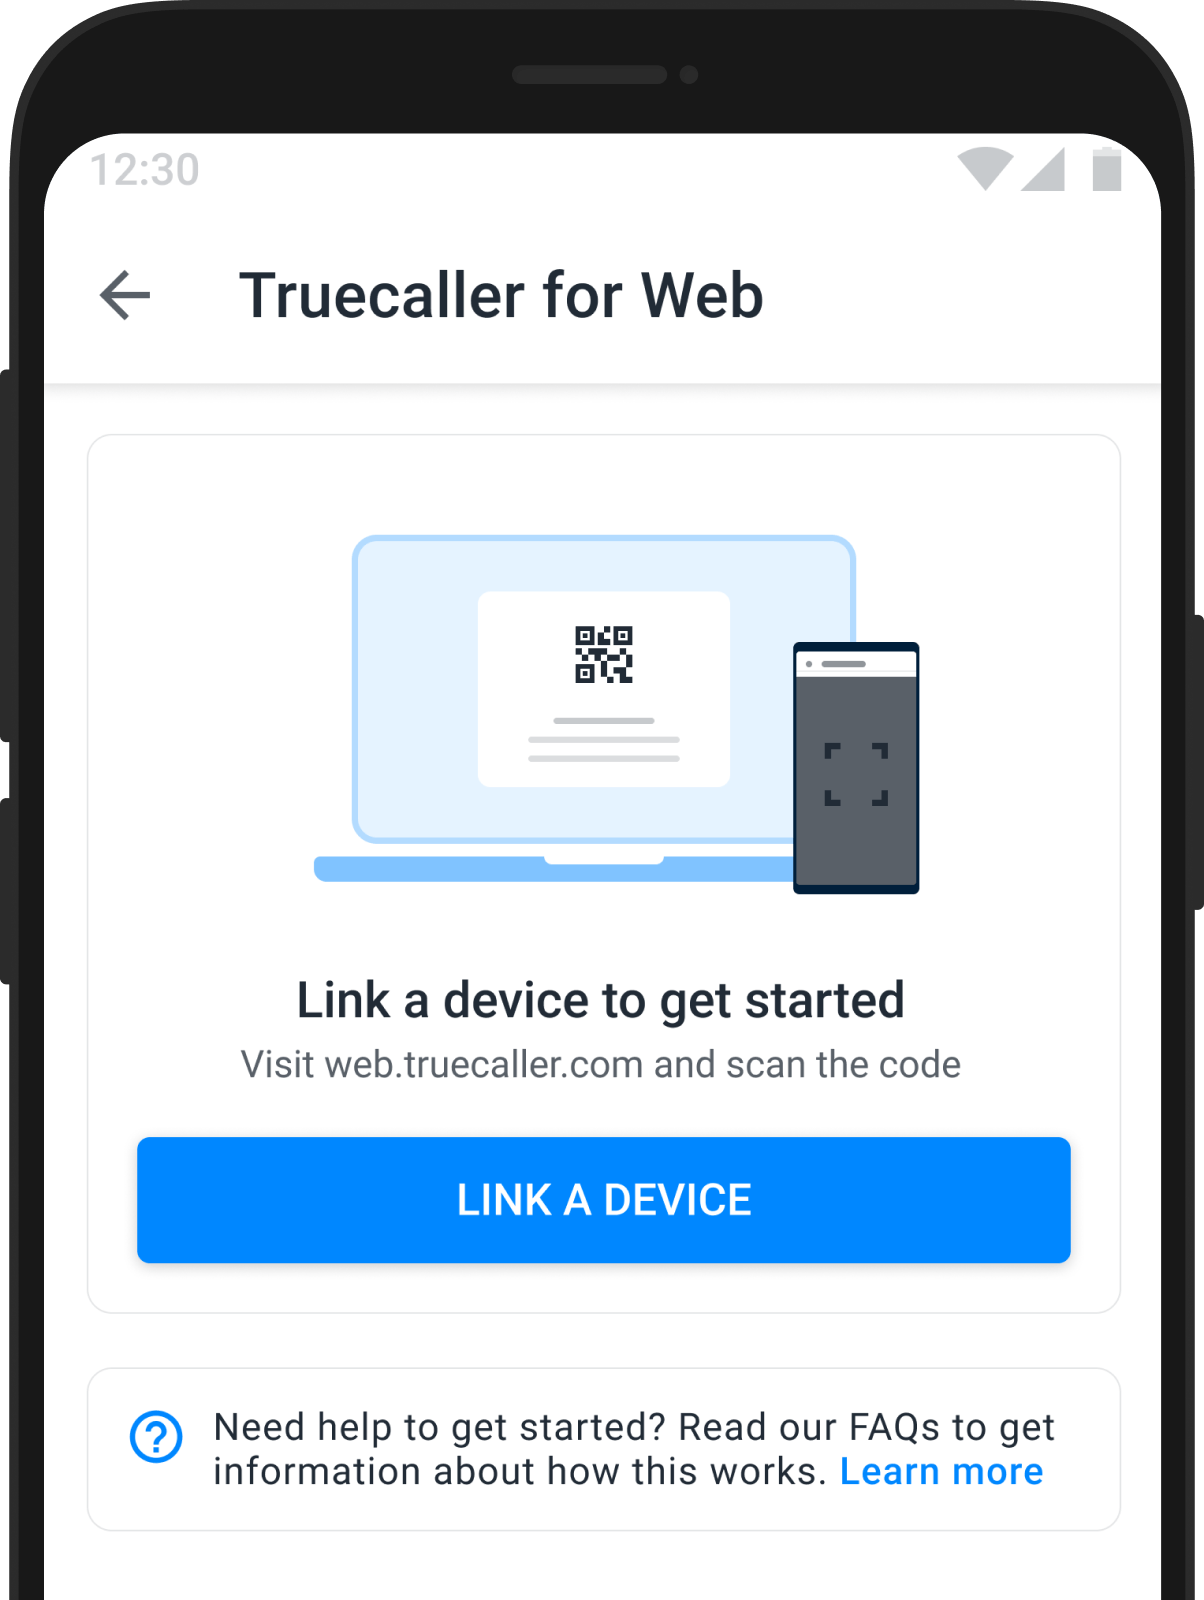 Truecaller for Web App Screen to Link Device